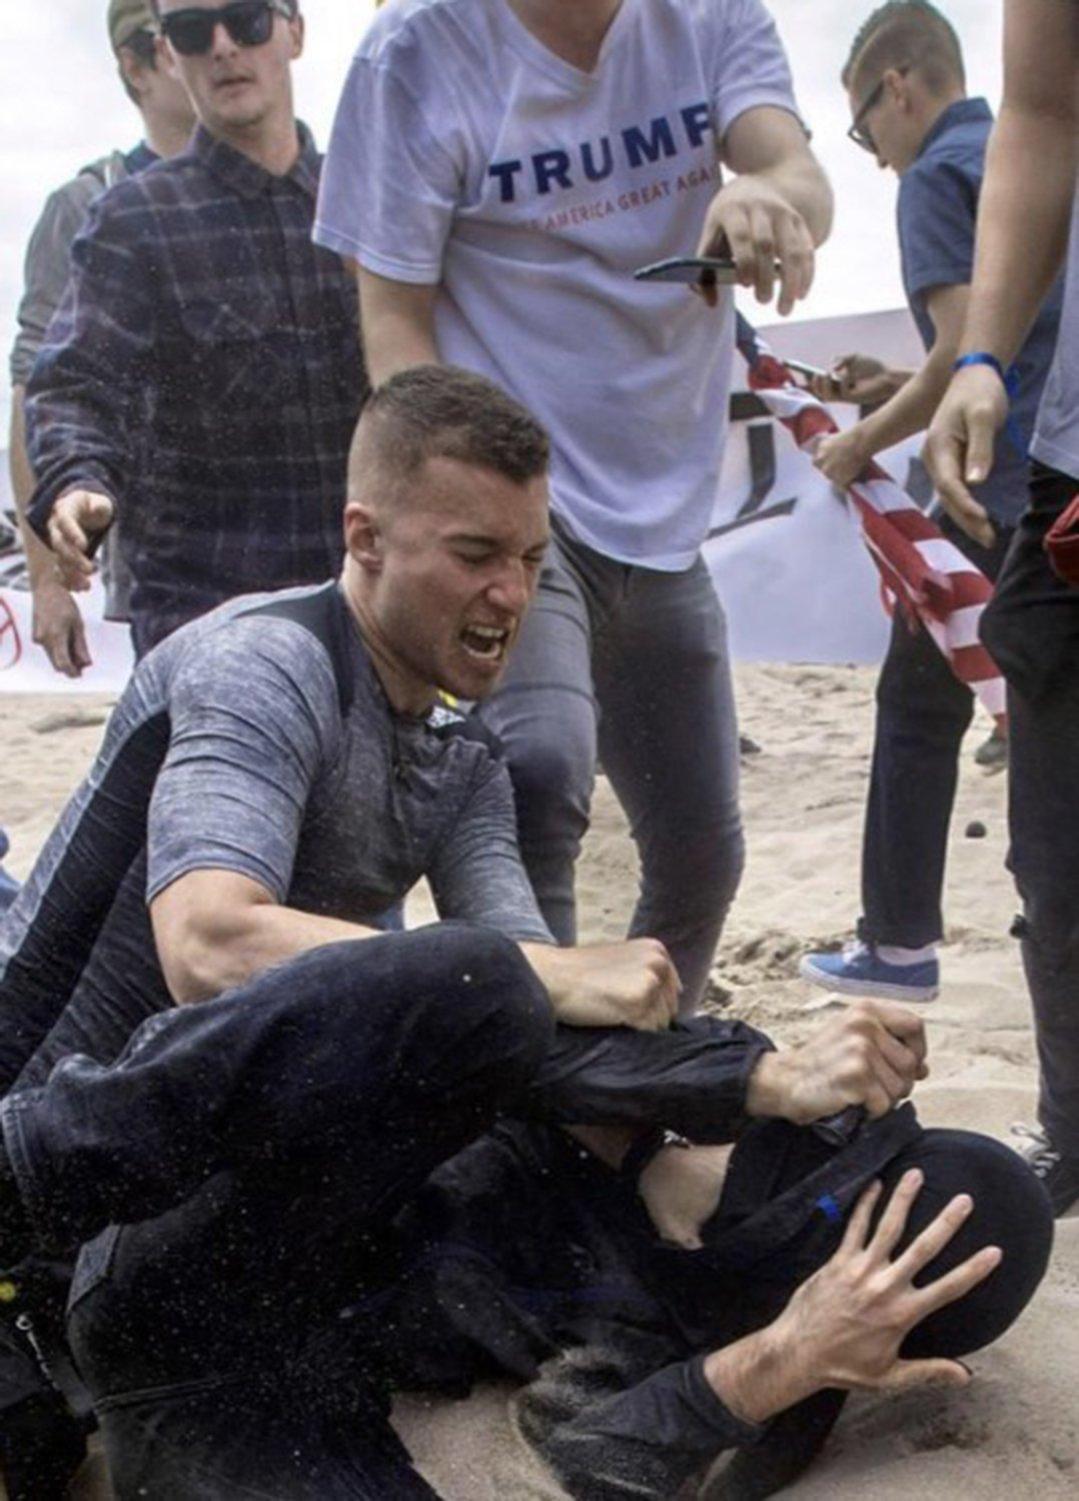 A screenshot from video reportedly shows Robert Rondo, leader of the so-called Rise Above Movement, attacking a counter-protestor at an event in Huntington Beach, Calif., in March 2017. The photo was included in a criminal complaint released by the Department of Justice. (Department of Justice/TNS)